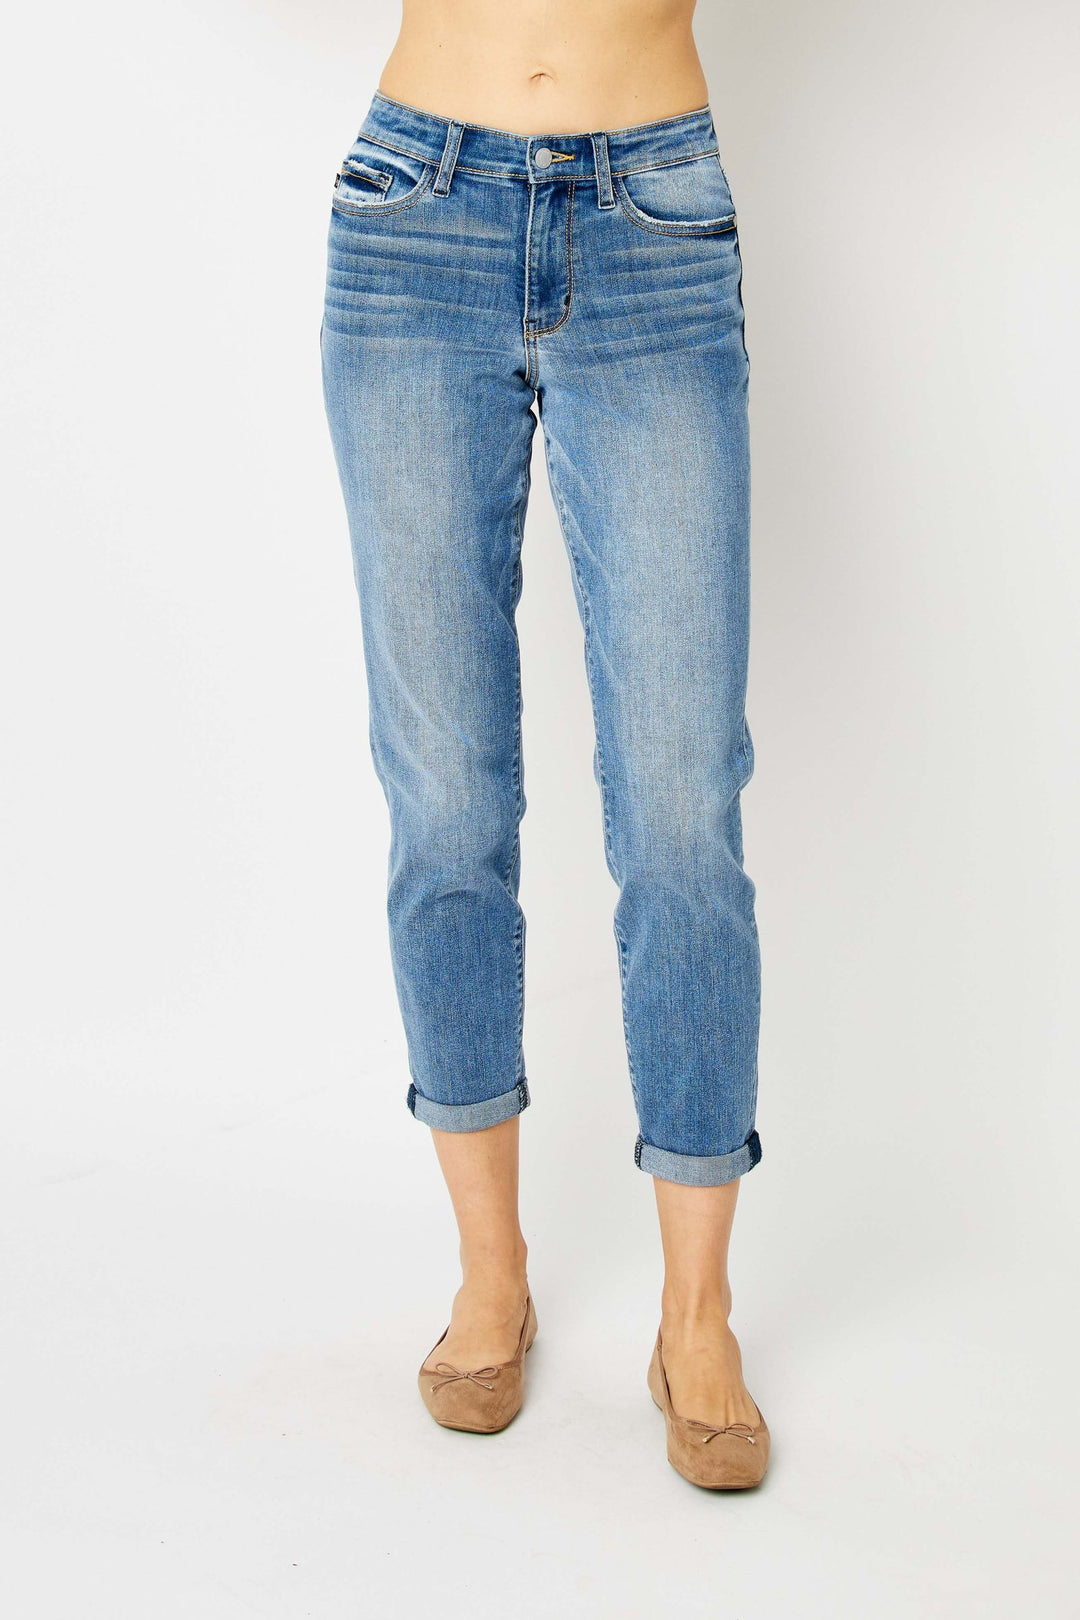 Millie Mid Rise Slim Fit Denim, Judy Blue-Denim-Inspired by Justeen-Women's Clothing Boutique in Chicago, Illinois